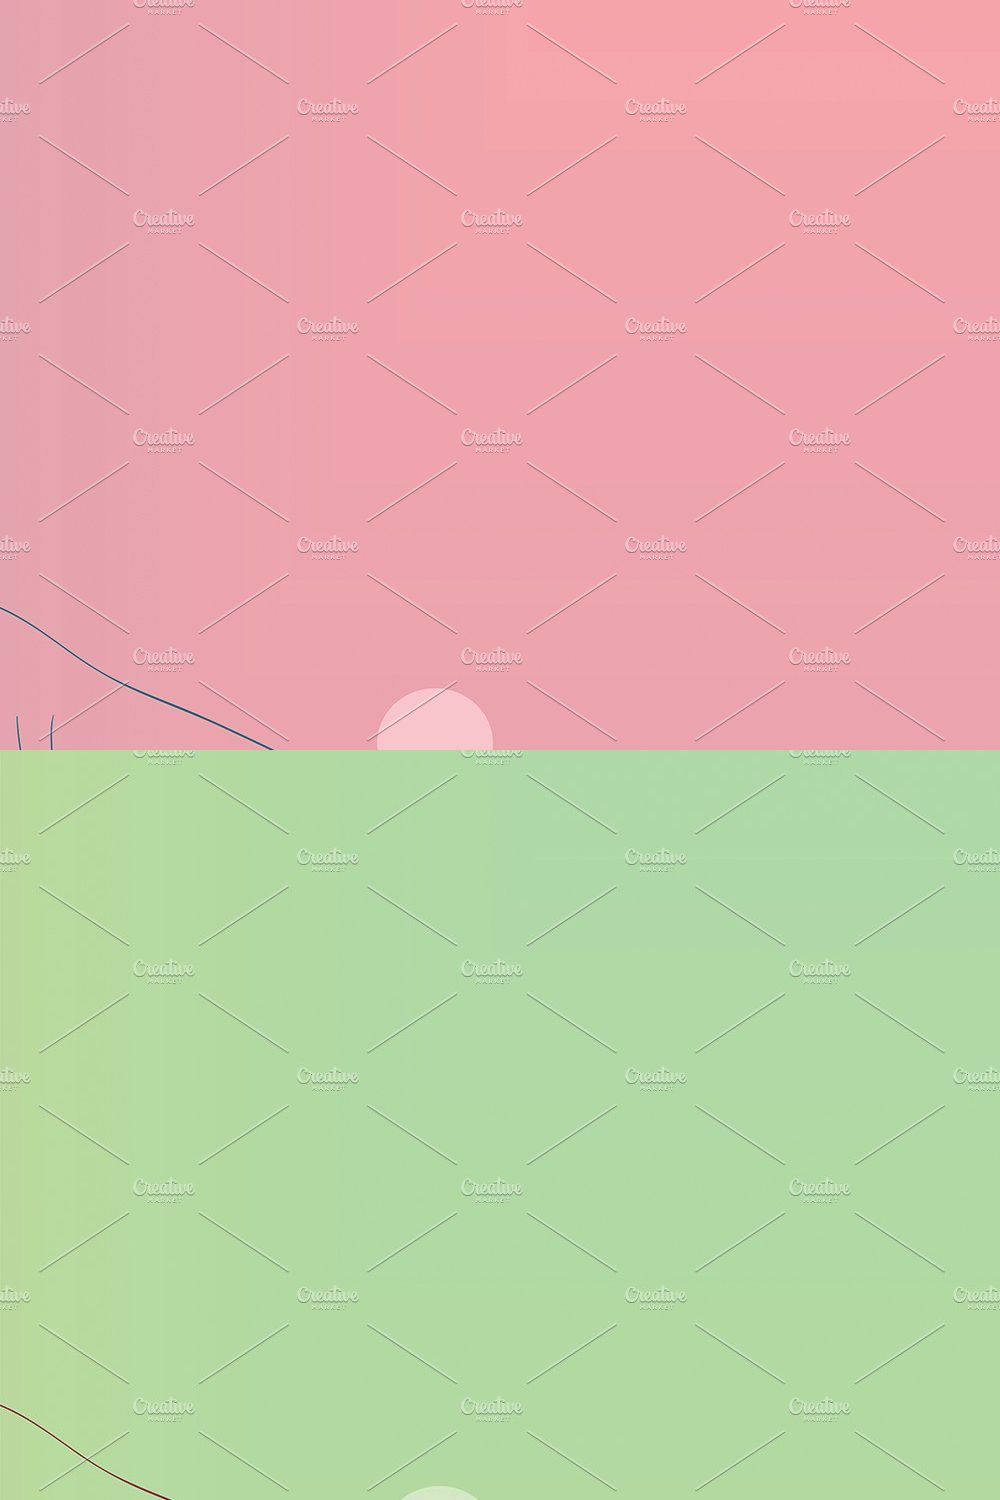 Sunset background pinterest preview image.